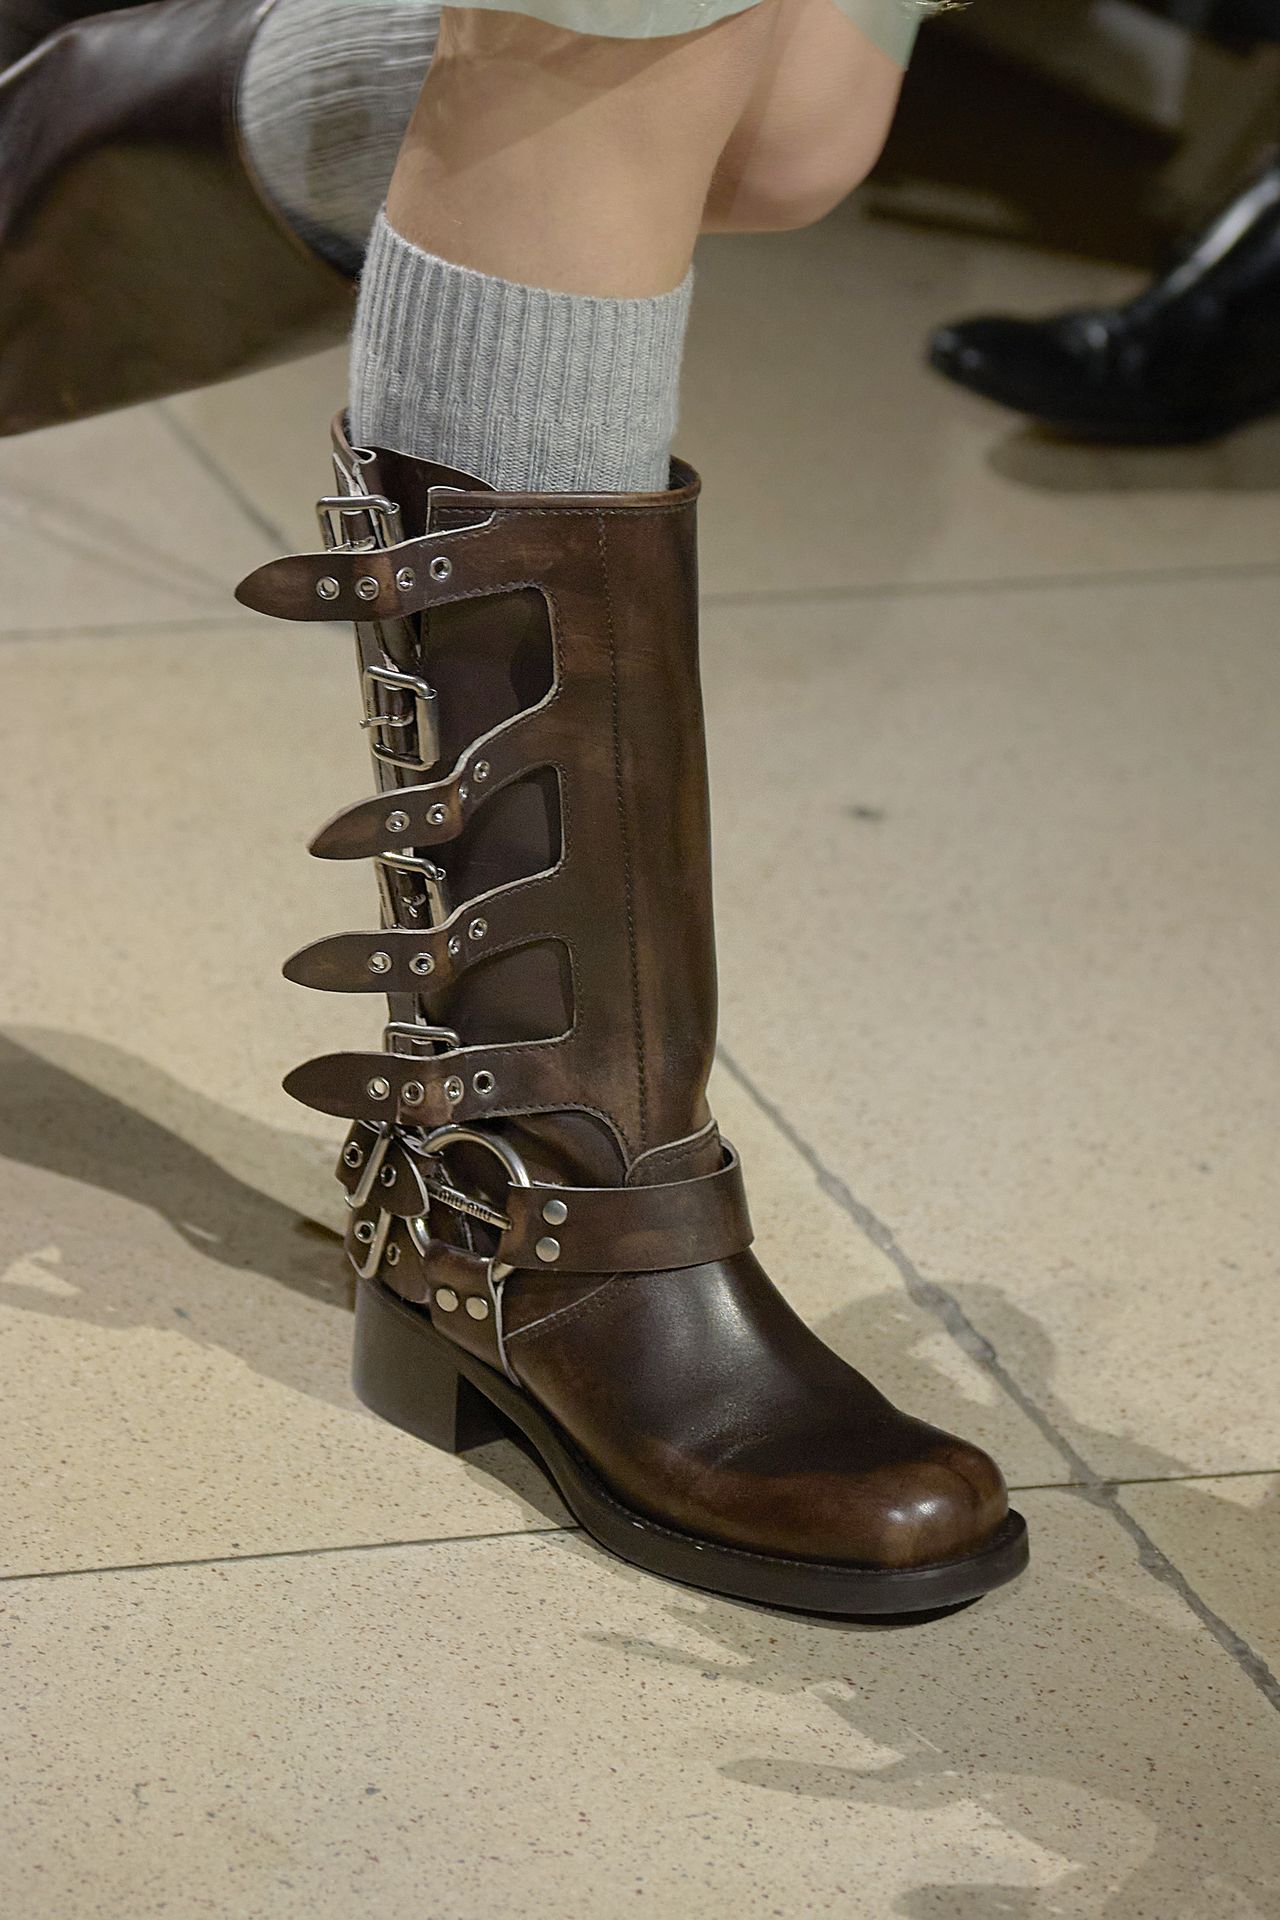 The $99 Nordstrom Boots I'm Buying to Get the Miu Miu Look | Who What Wear